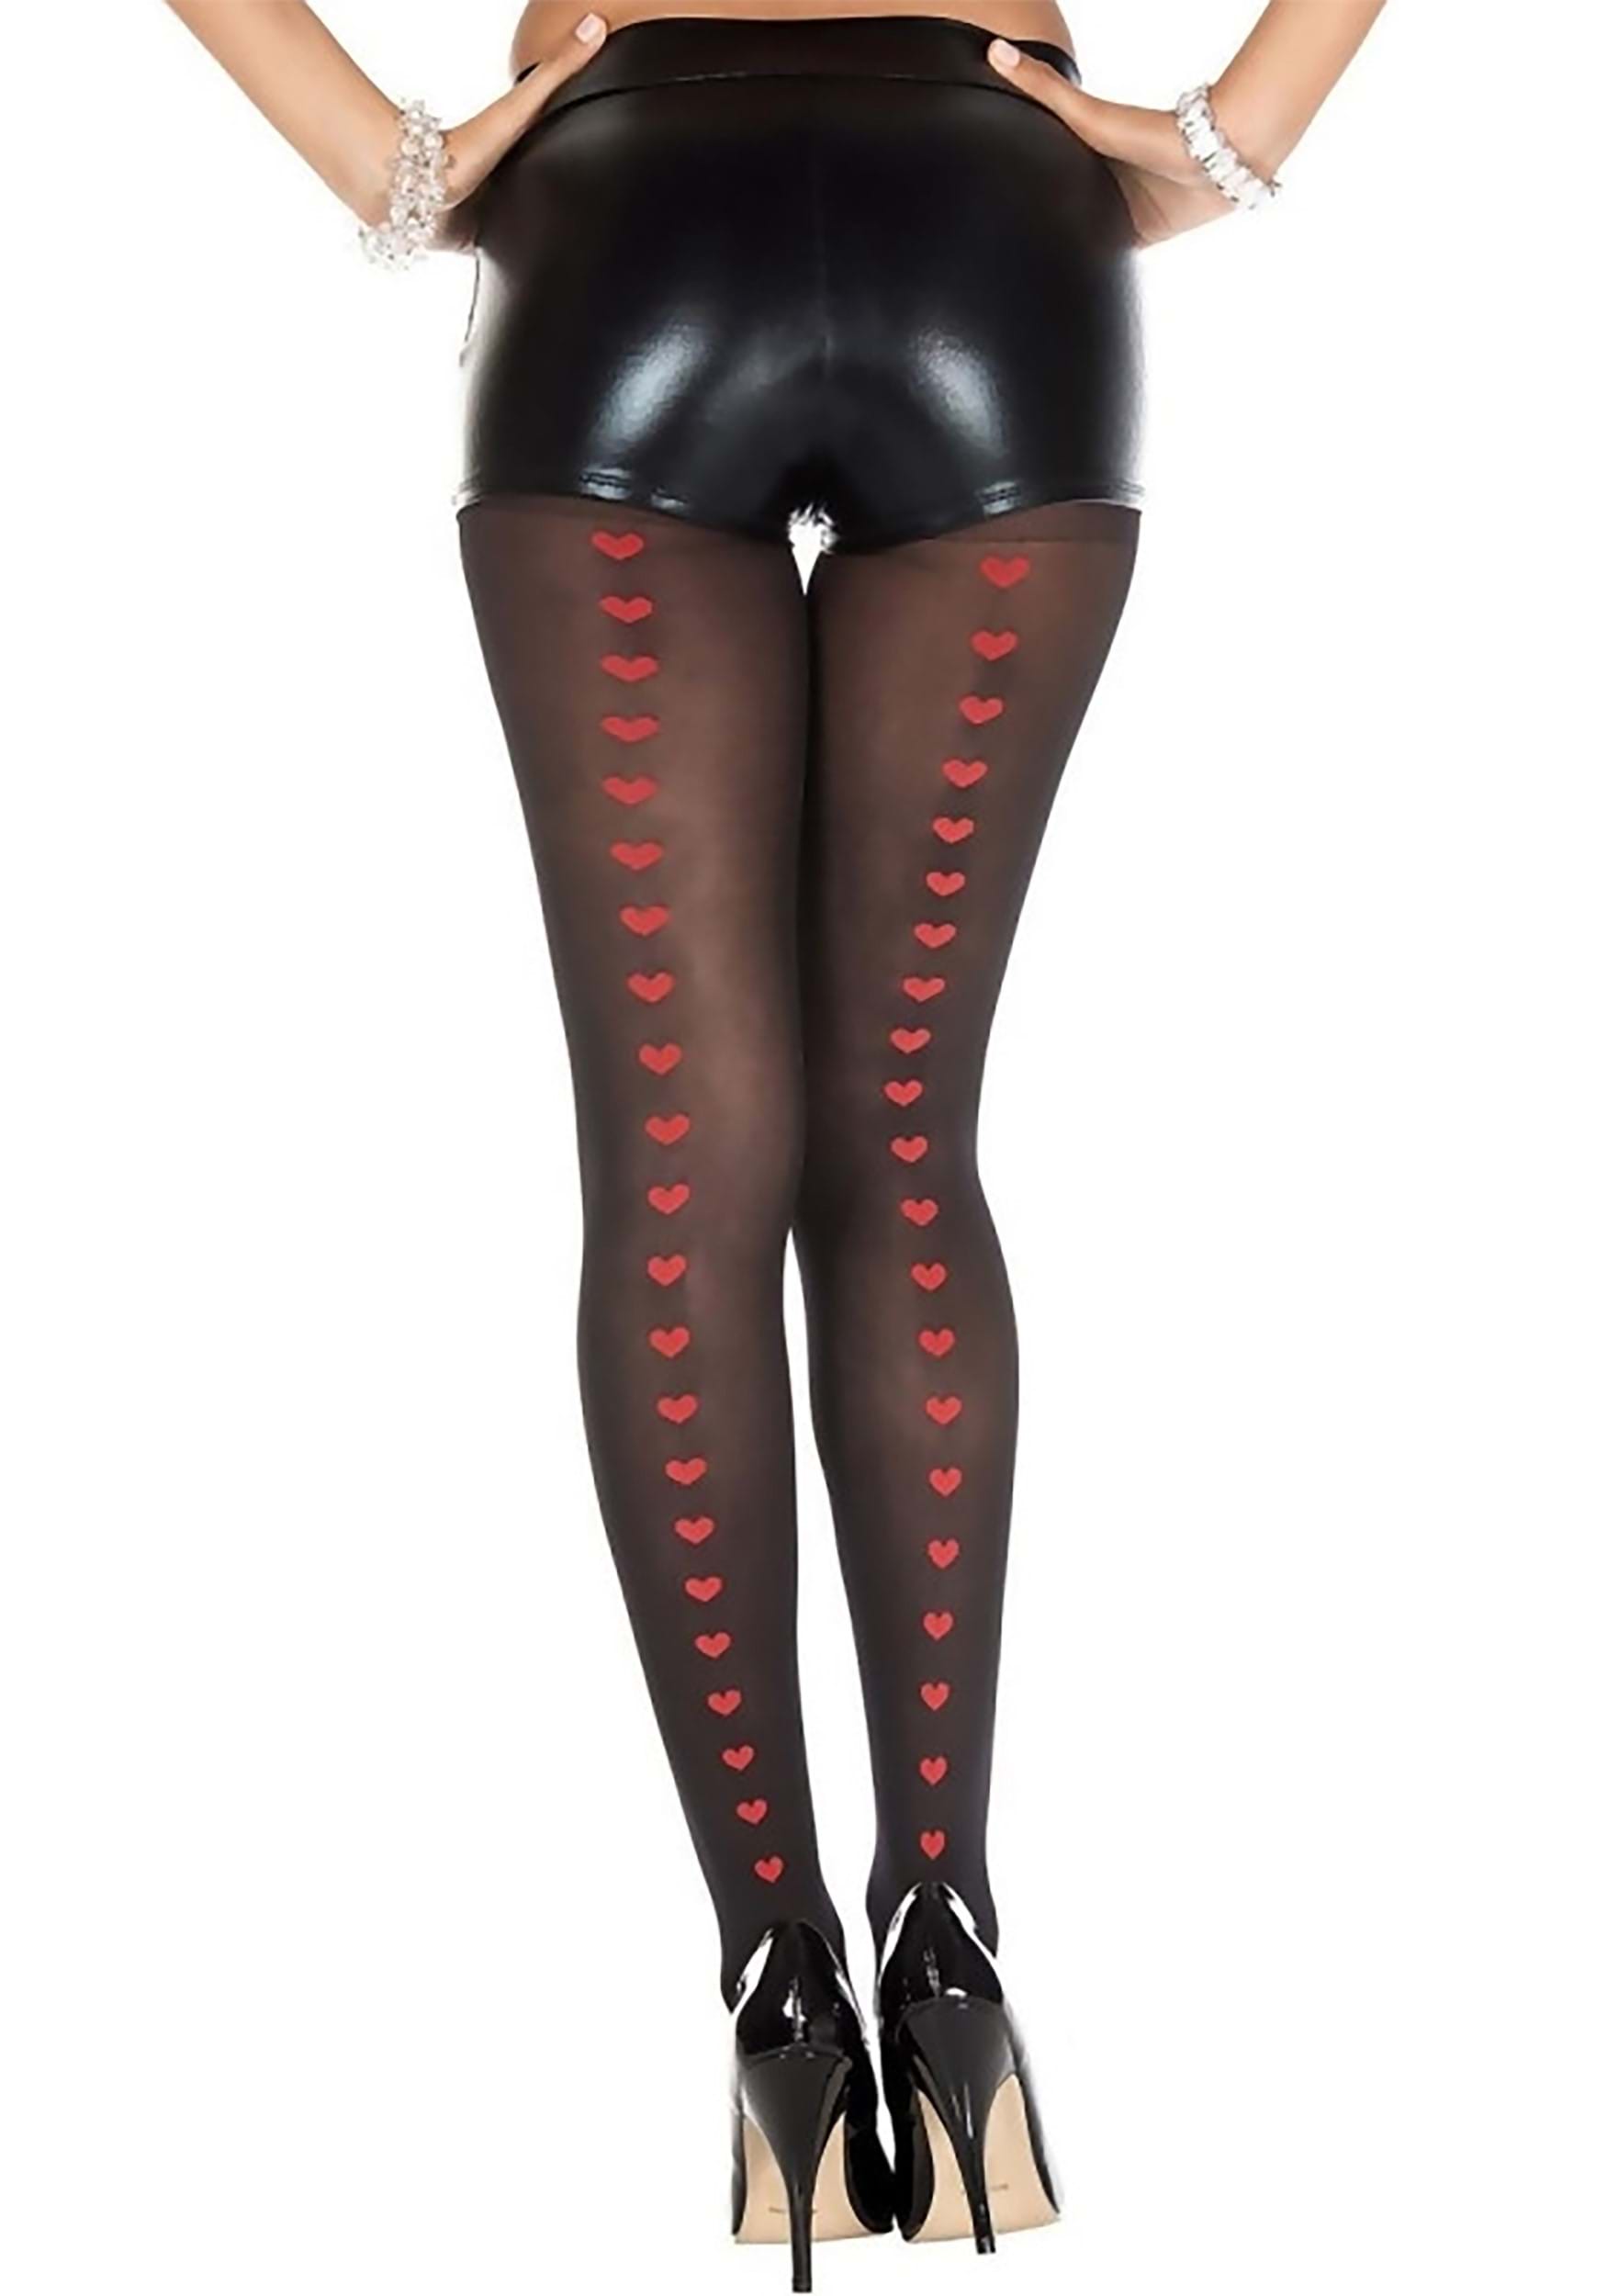 https://images.halloweencostumes.ca/products/82613/1-1/heart-backseam-tights.jpg